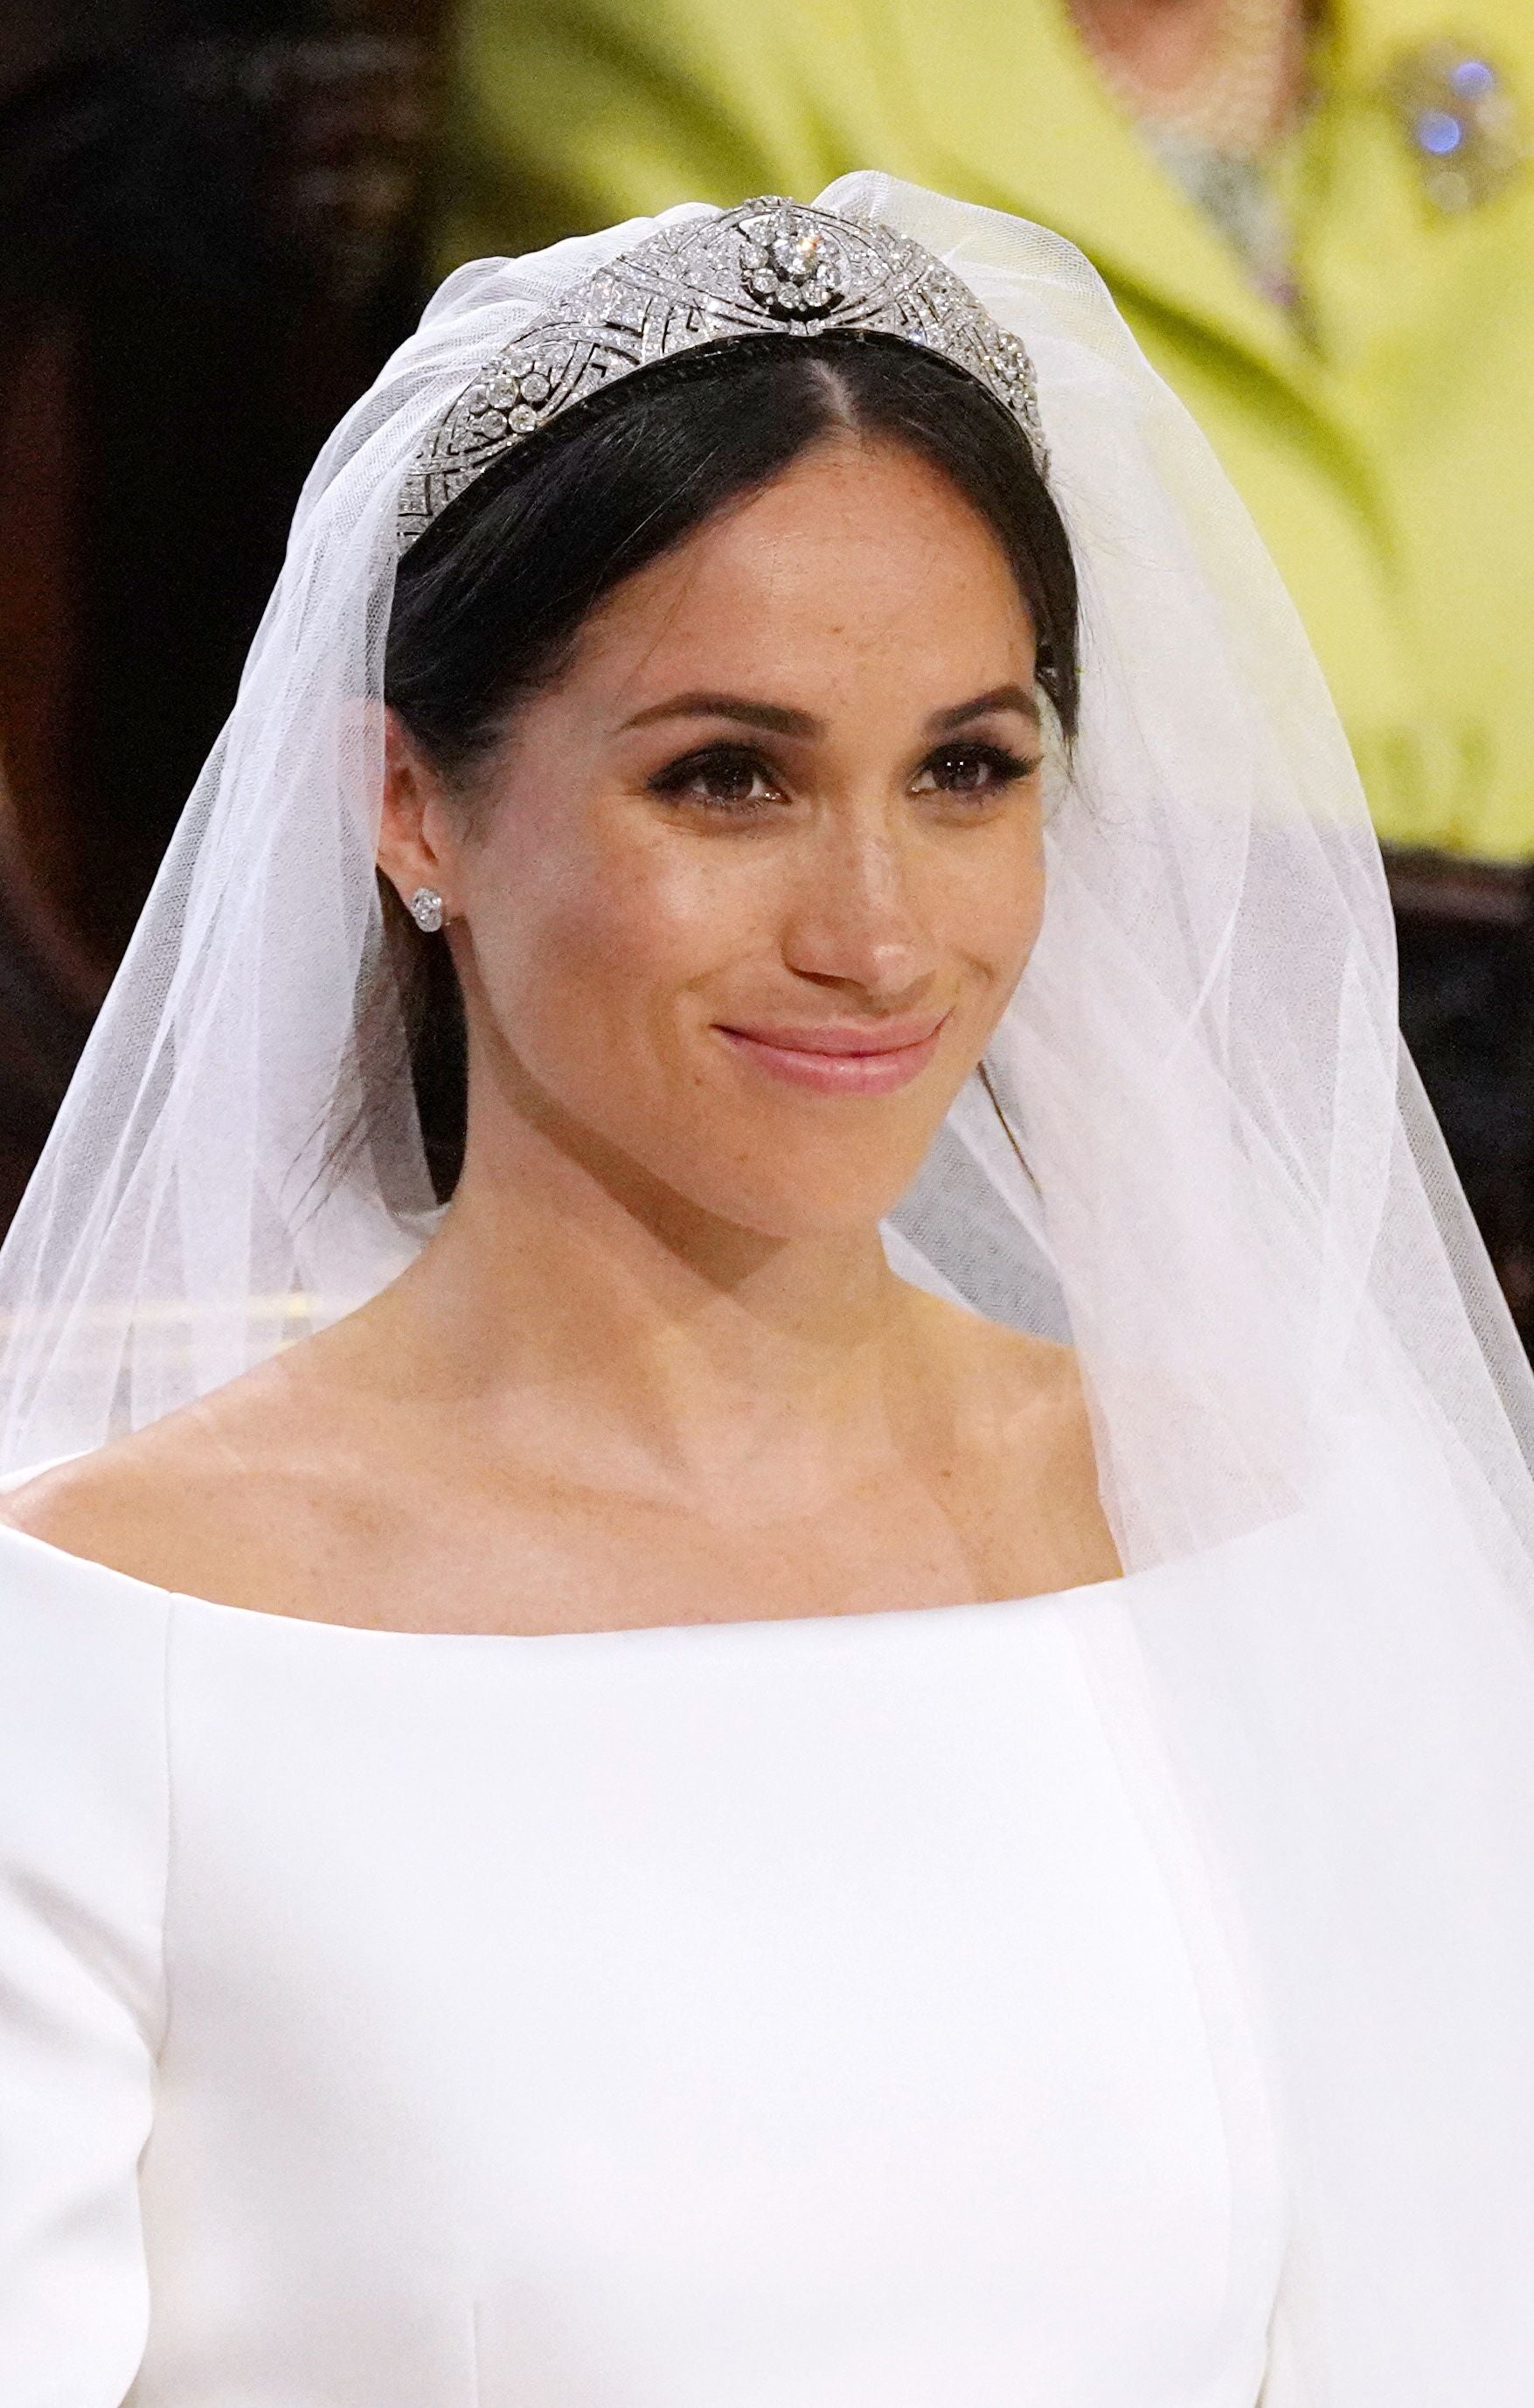 Meghan Markle's Bridal Beauty Look Was Natural And Understated, And We Love It
